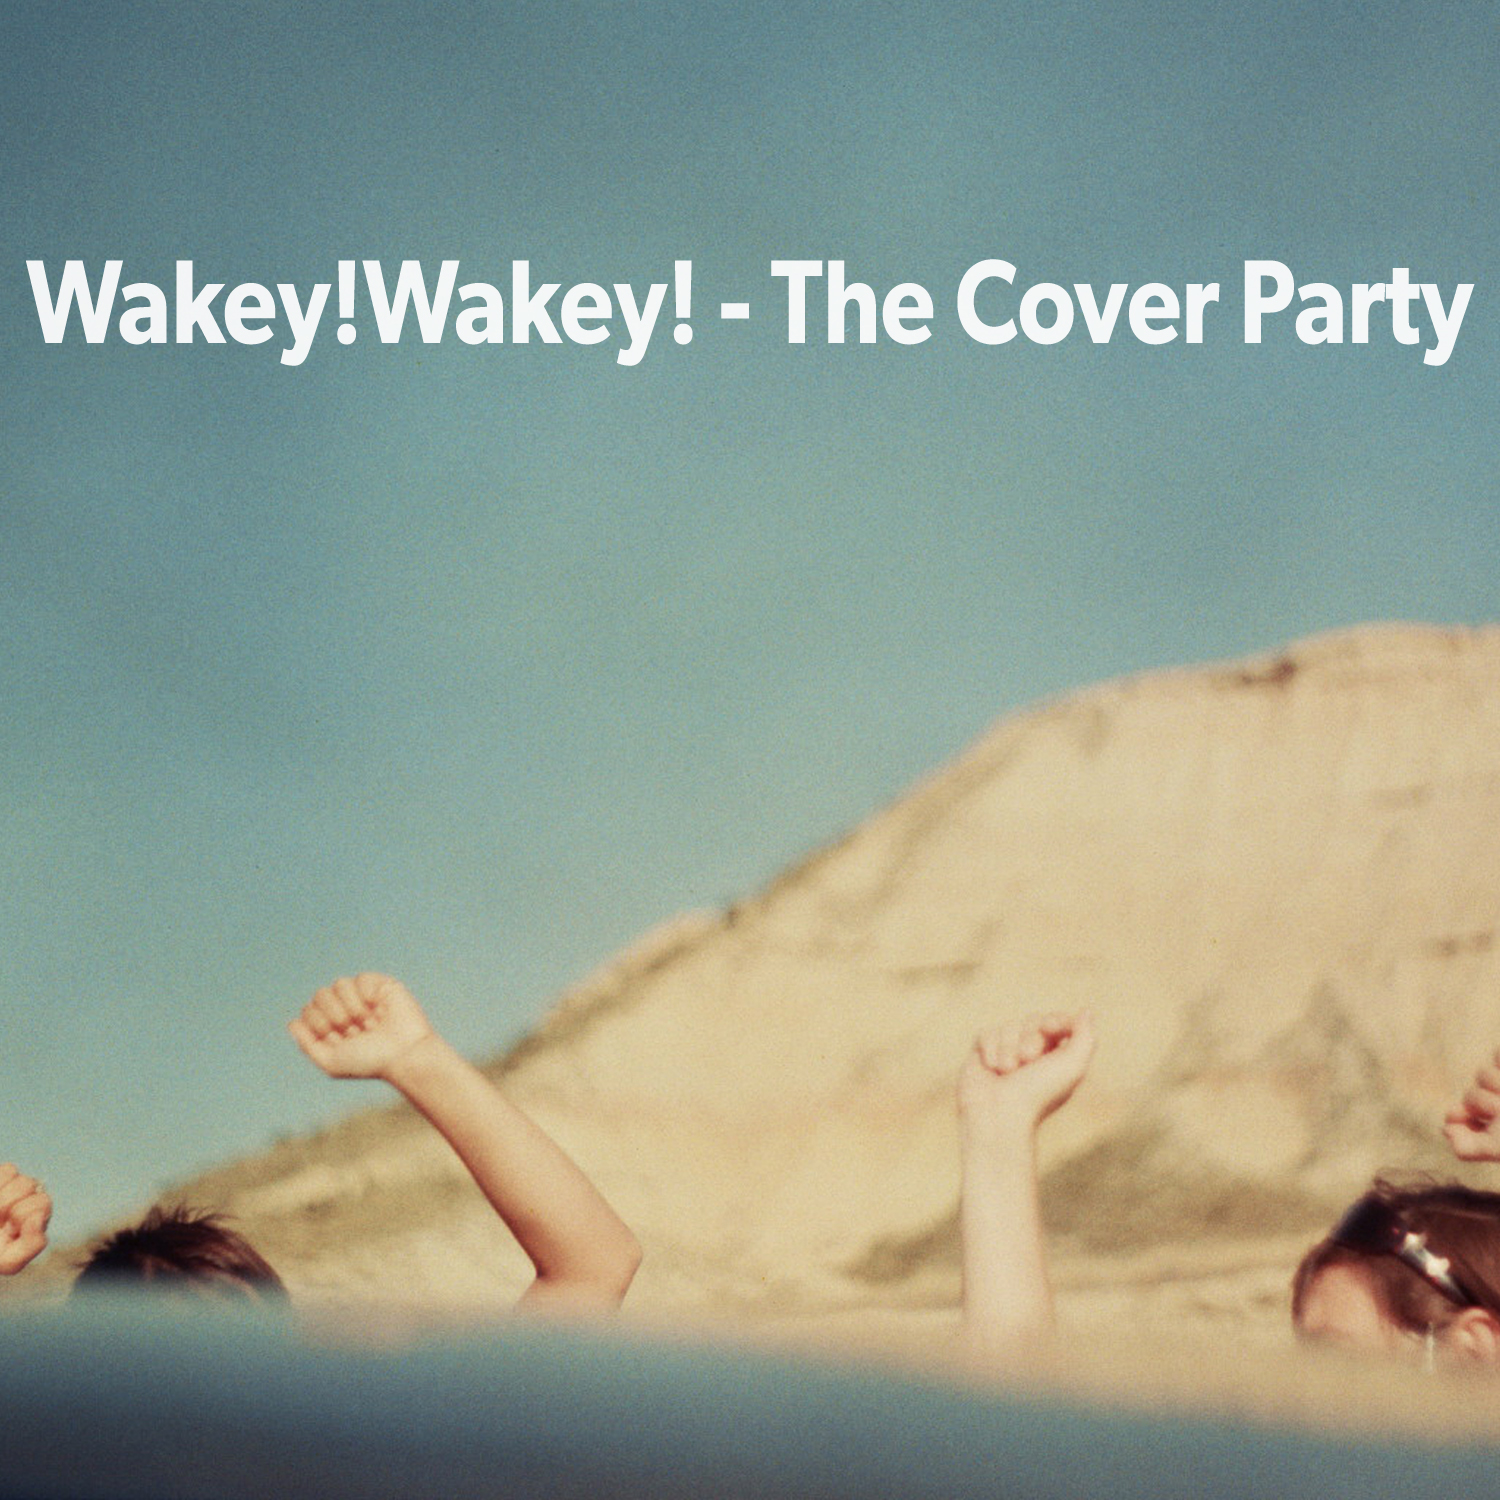 Wakey!Wakey! joins the Cover Party for Record Store Day